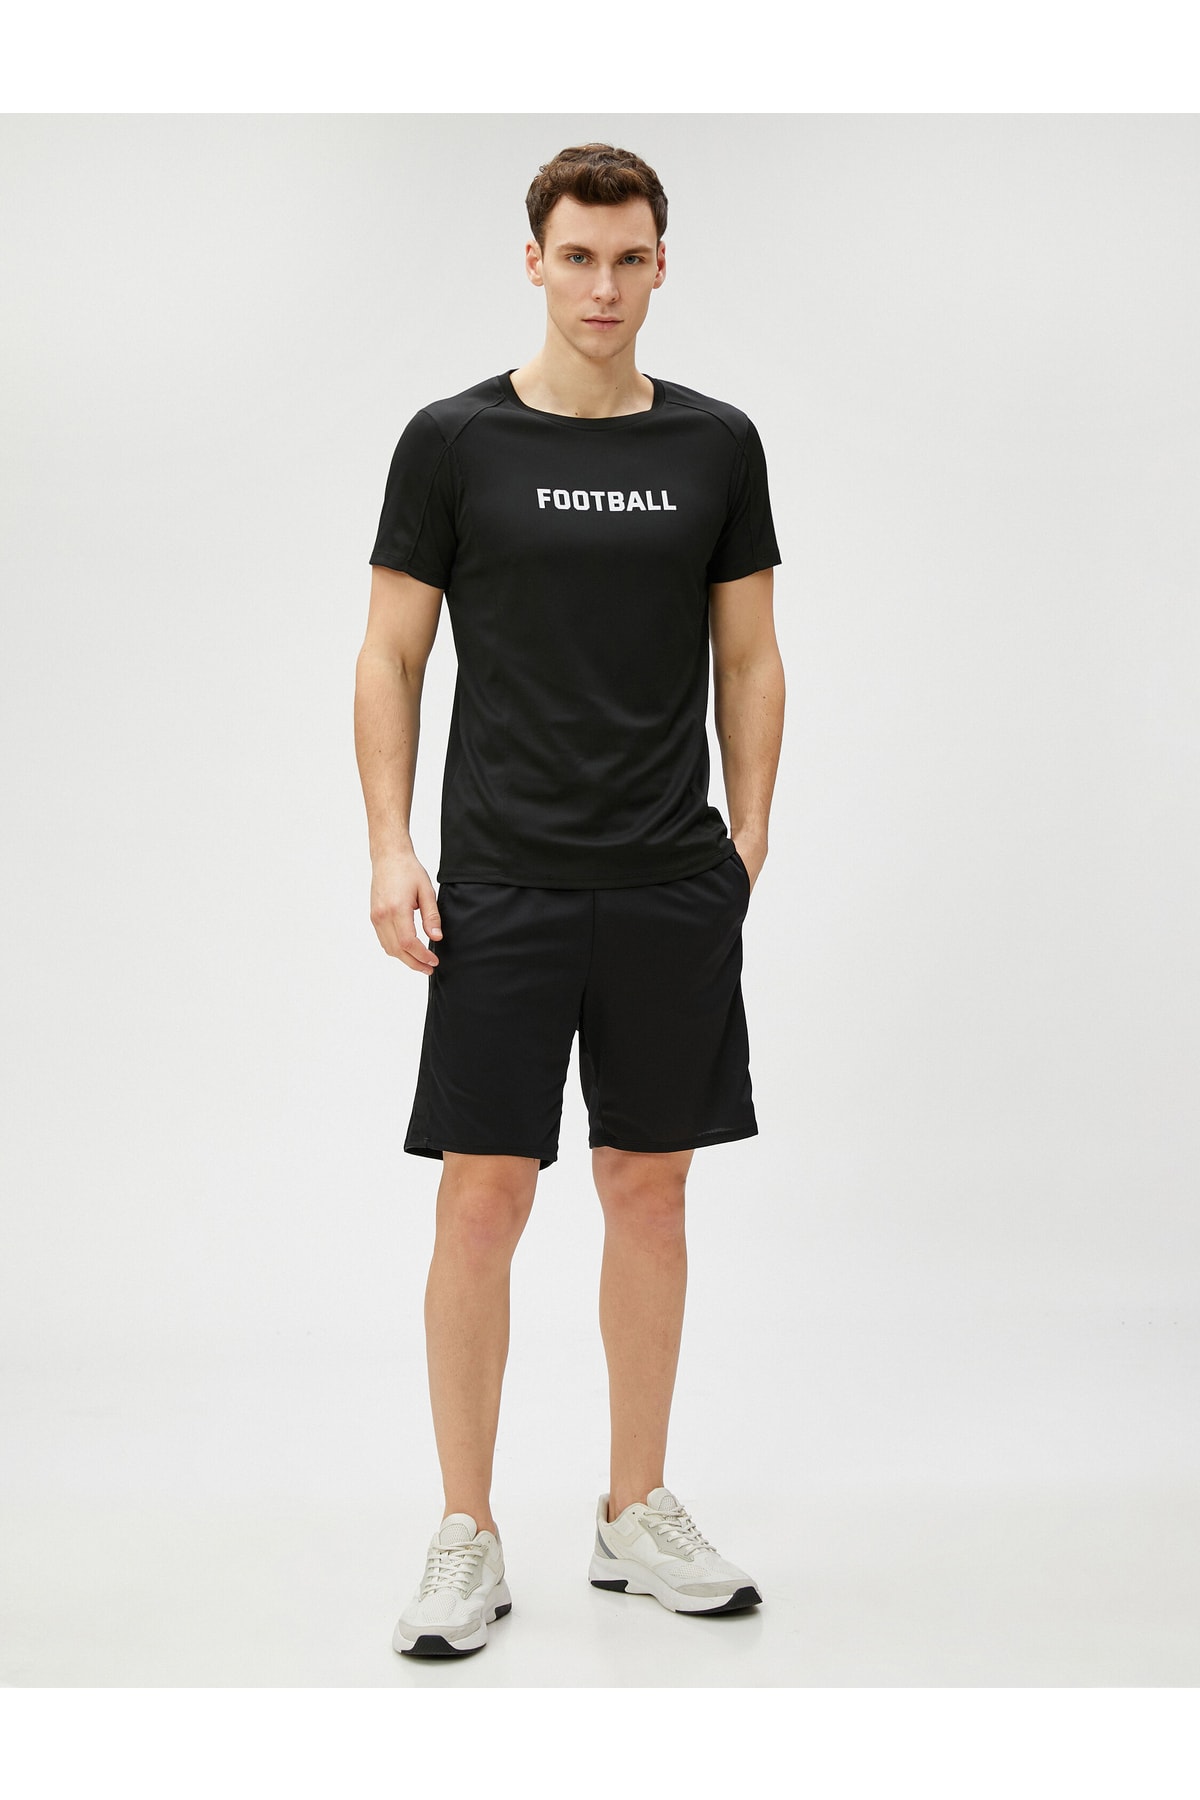 Koton Short Sports Shorts Double Layered with a lace-up waist with pocket.